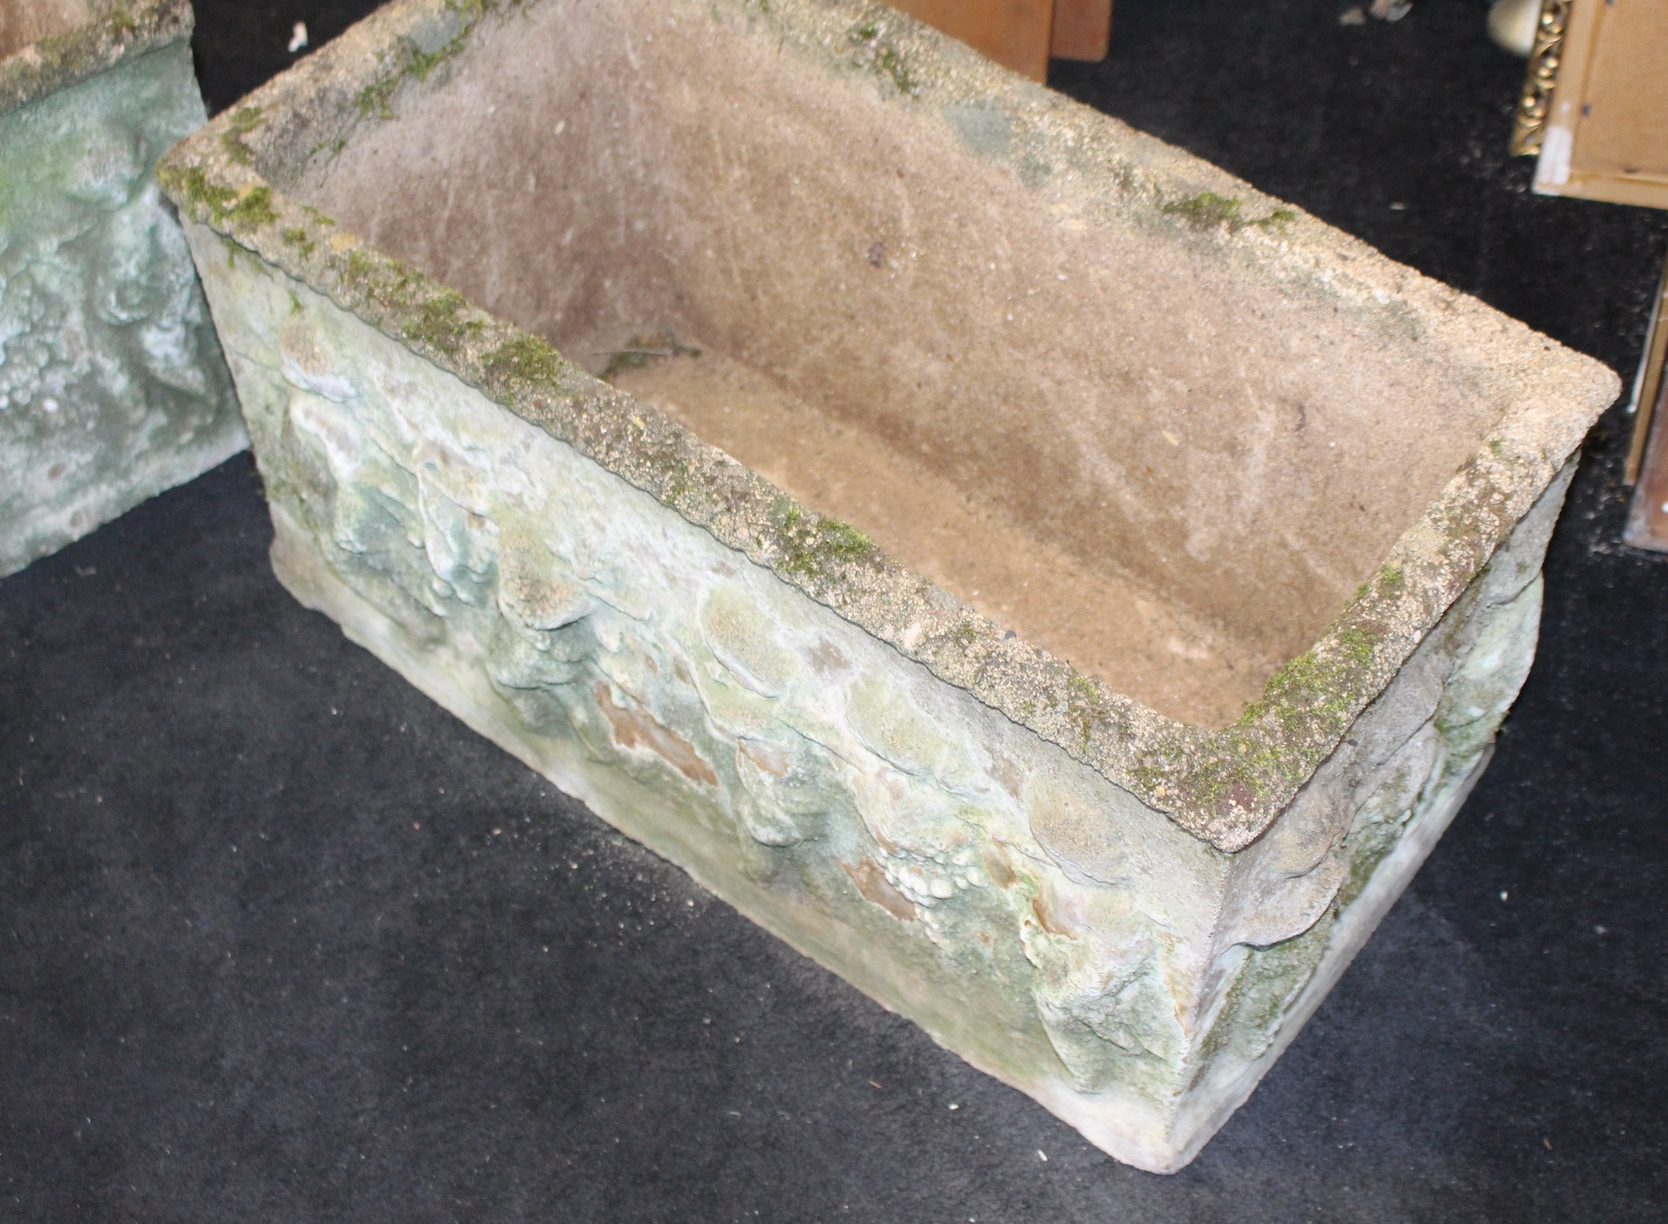 Pair of Old Reconstituted Cherubic Garden Planter Troughs - Image 4 of 4